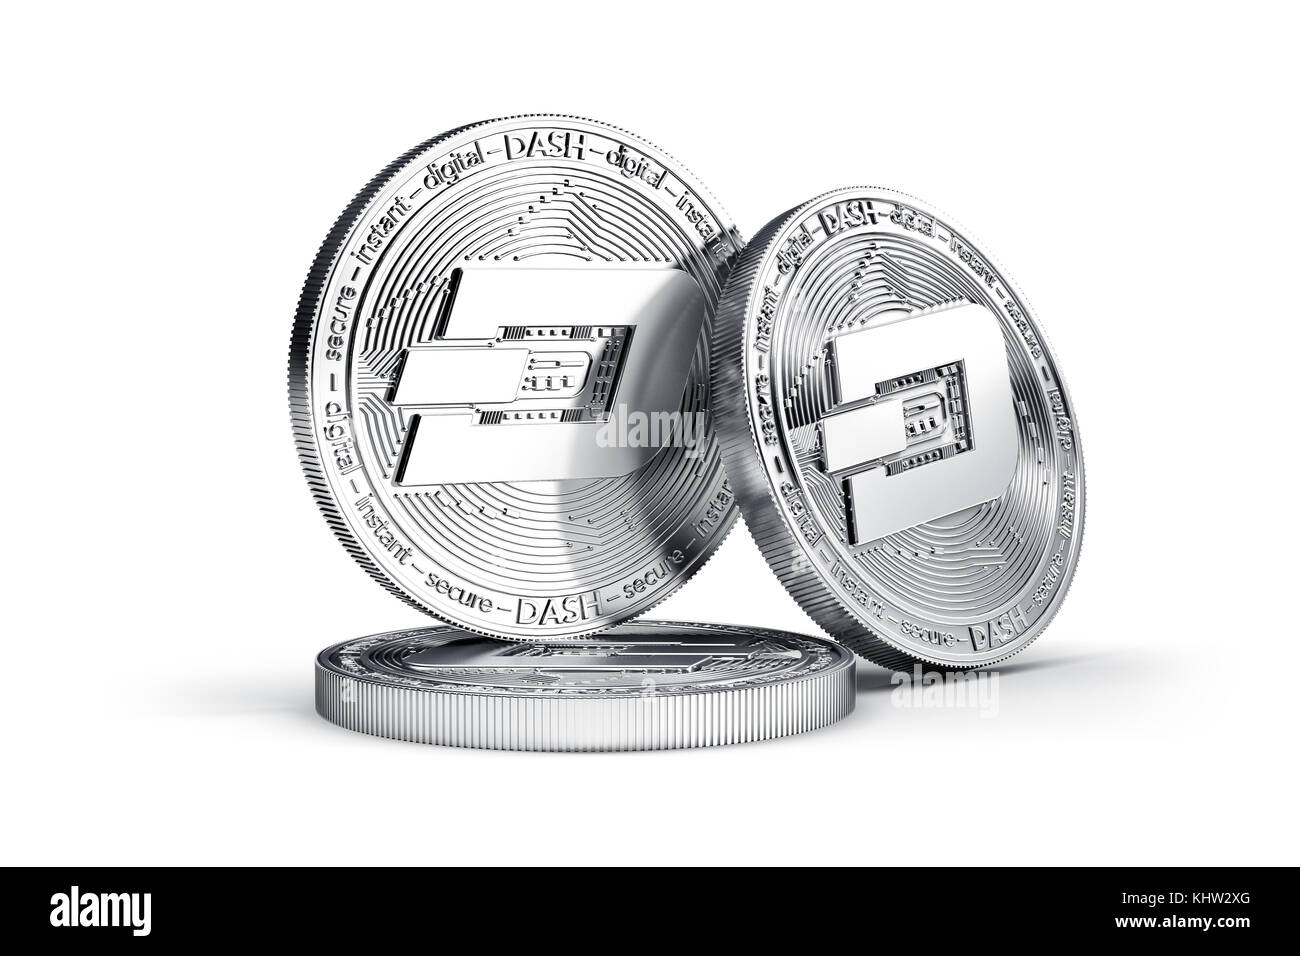 Three Dash concept physical coins isolated on white background. 3D rendering. New virtual money Stock Photo